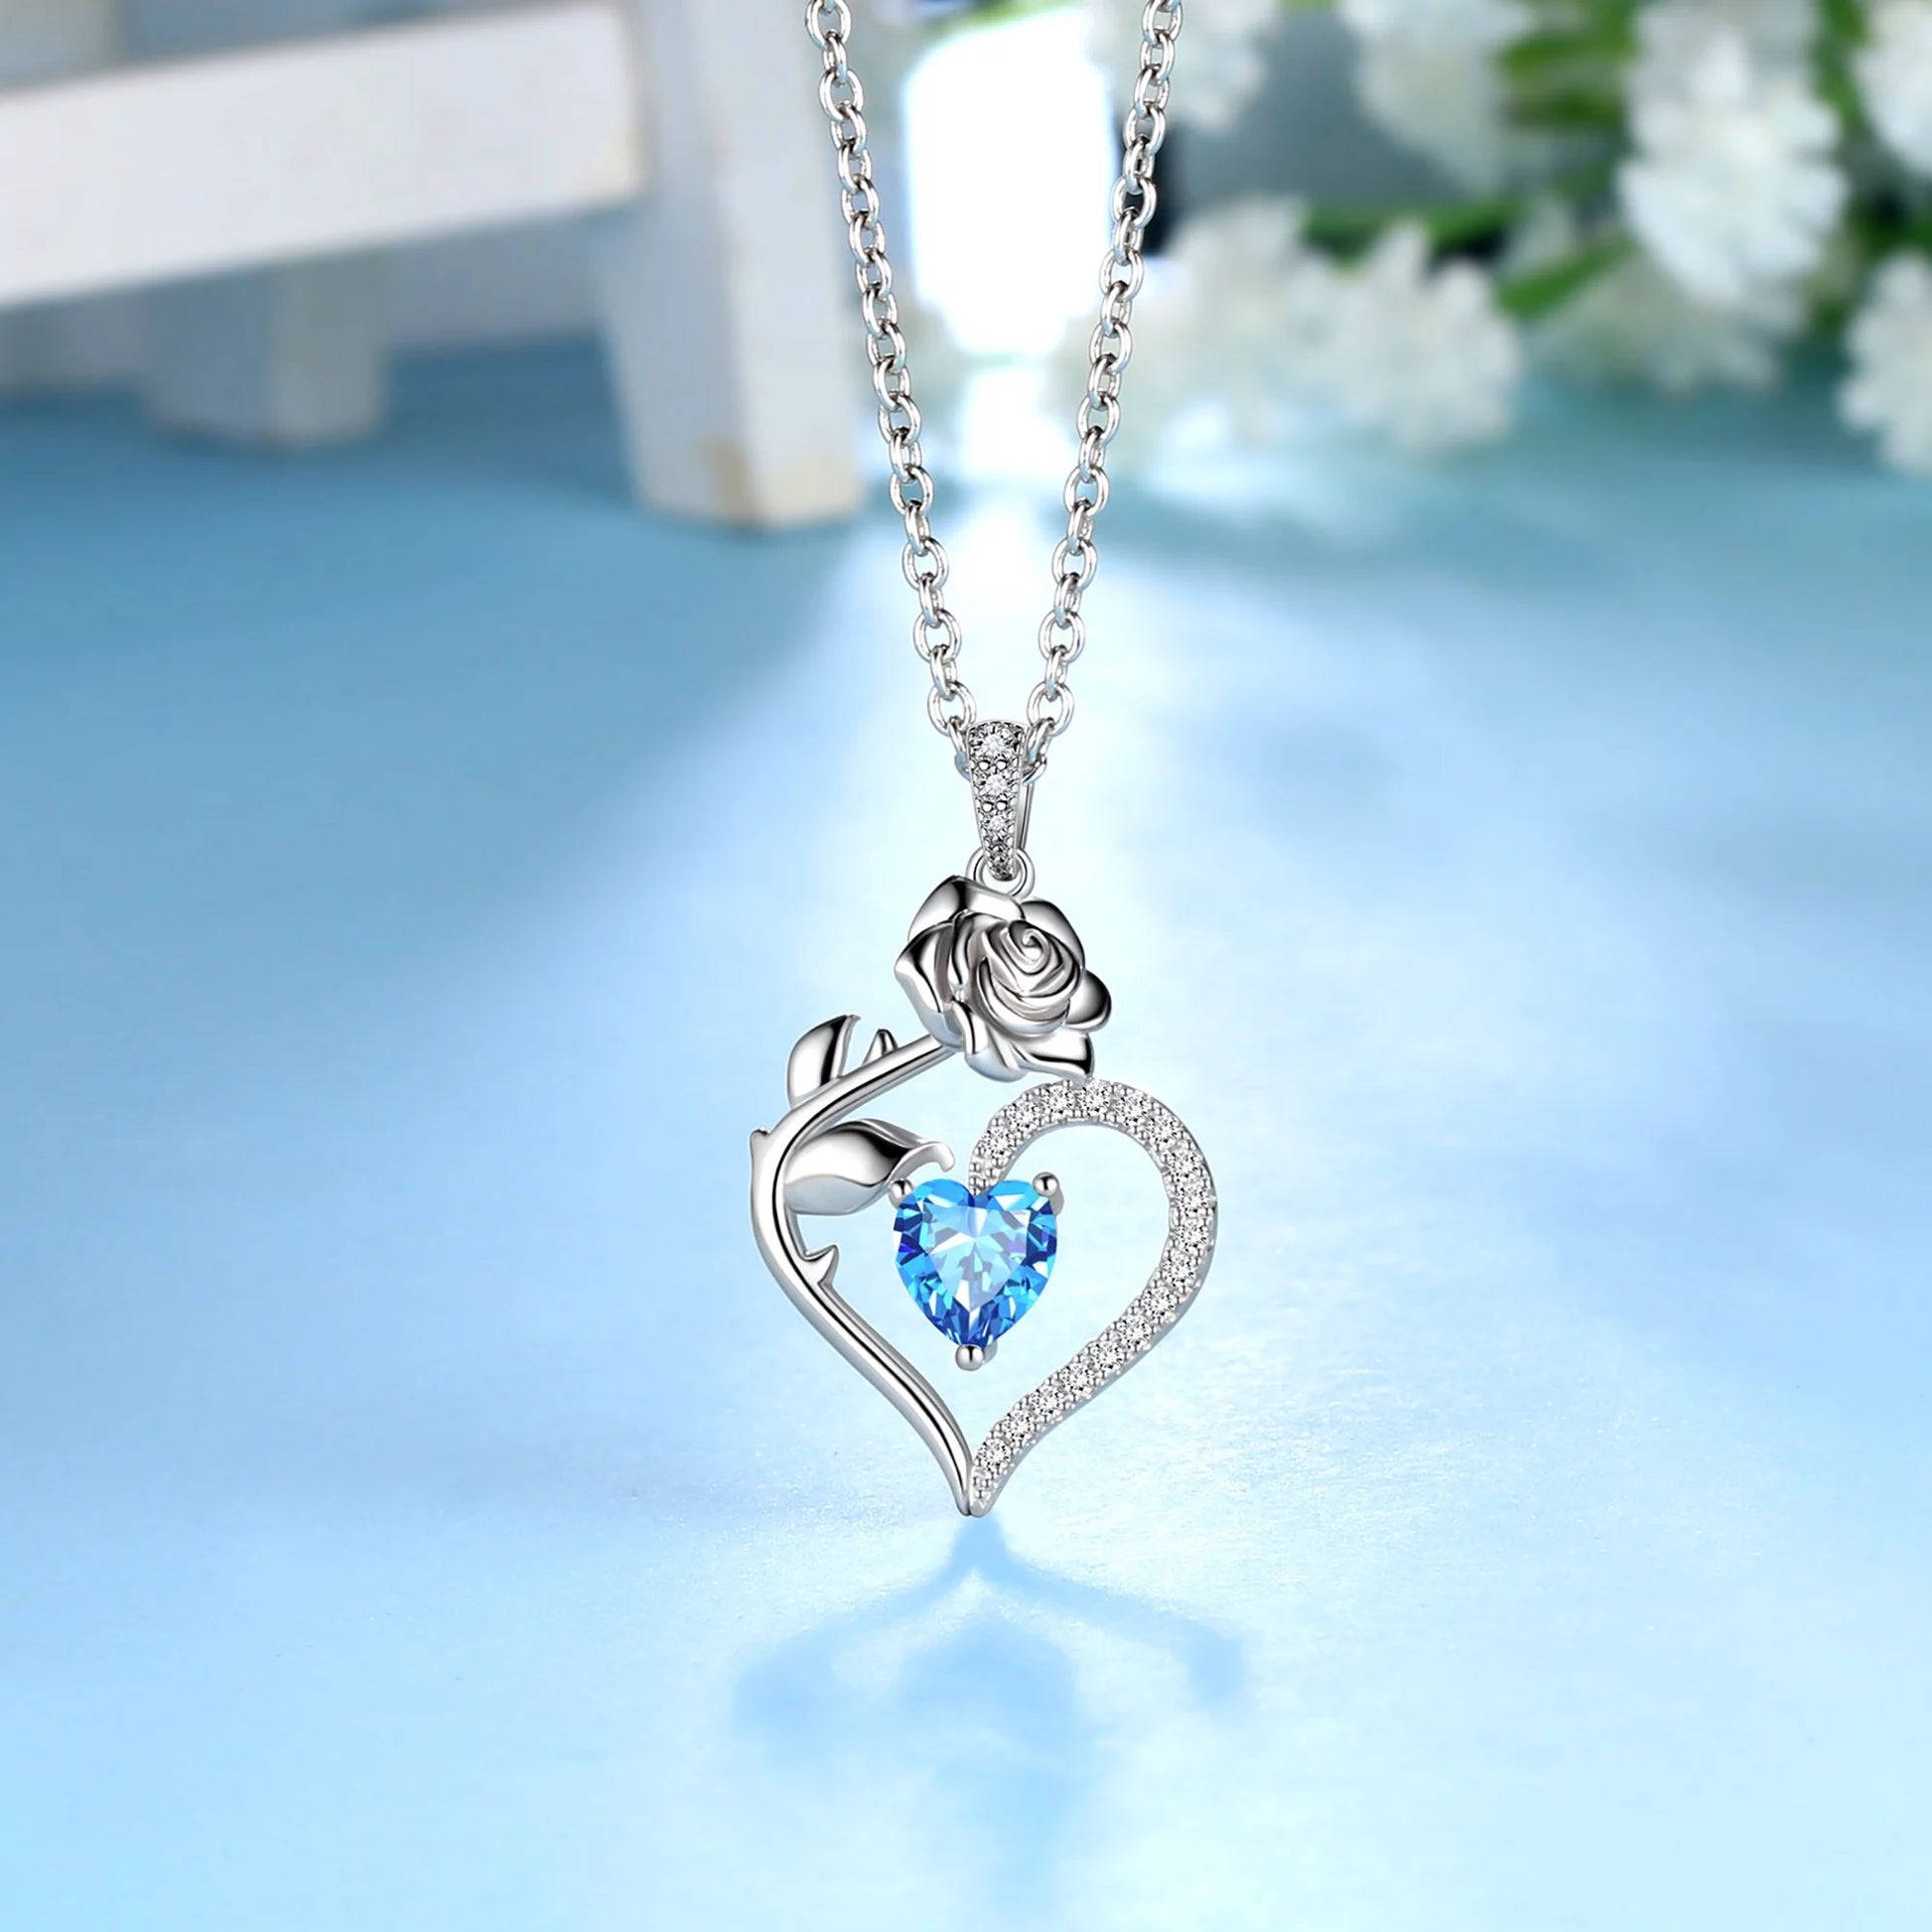 925 Sterling Silver Birthstone Necklace for Women,Rose Flower Heart Pendant Necklace Jewelry Gifts